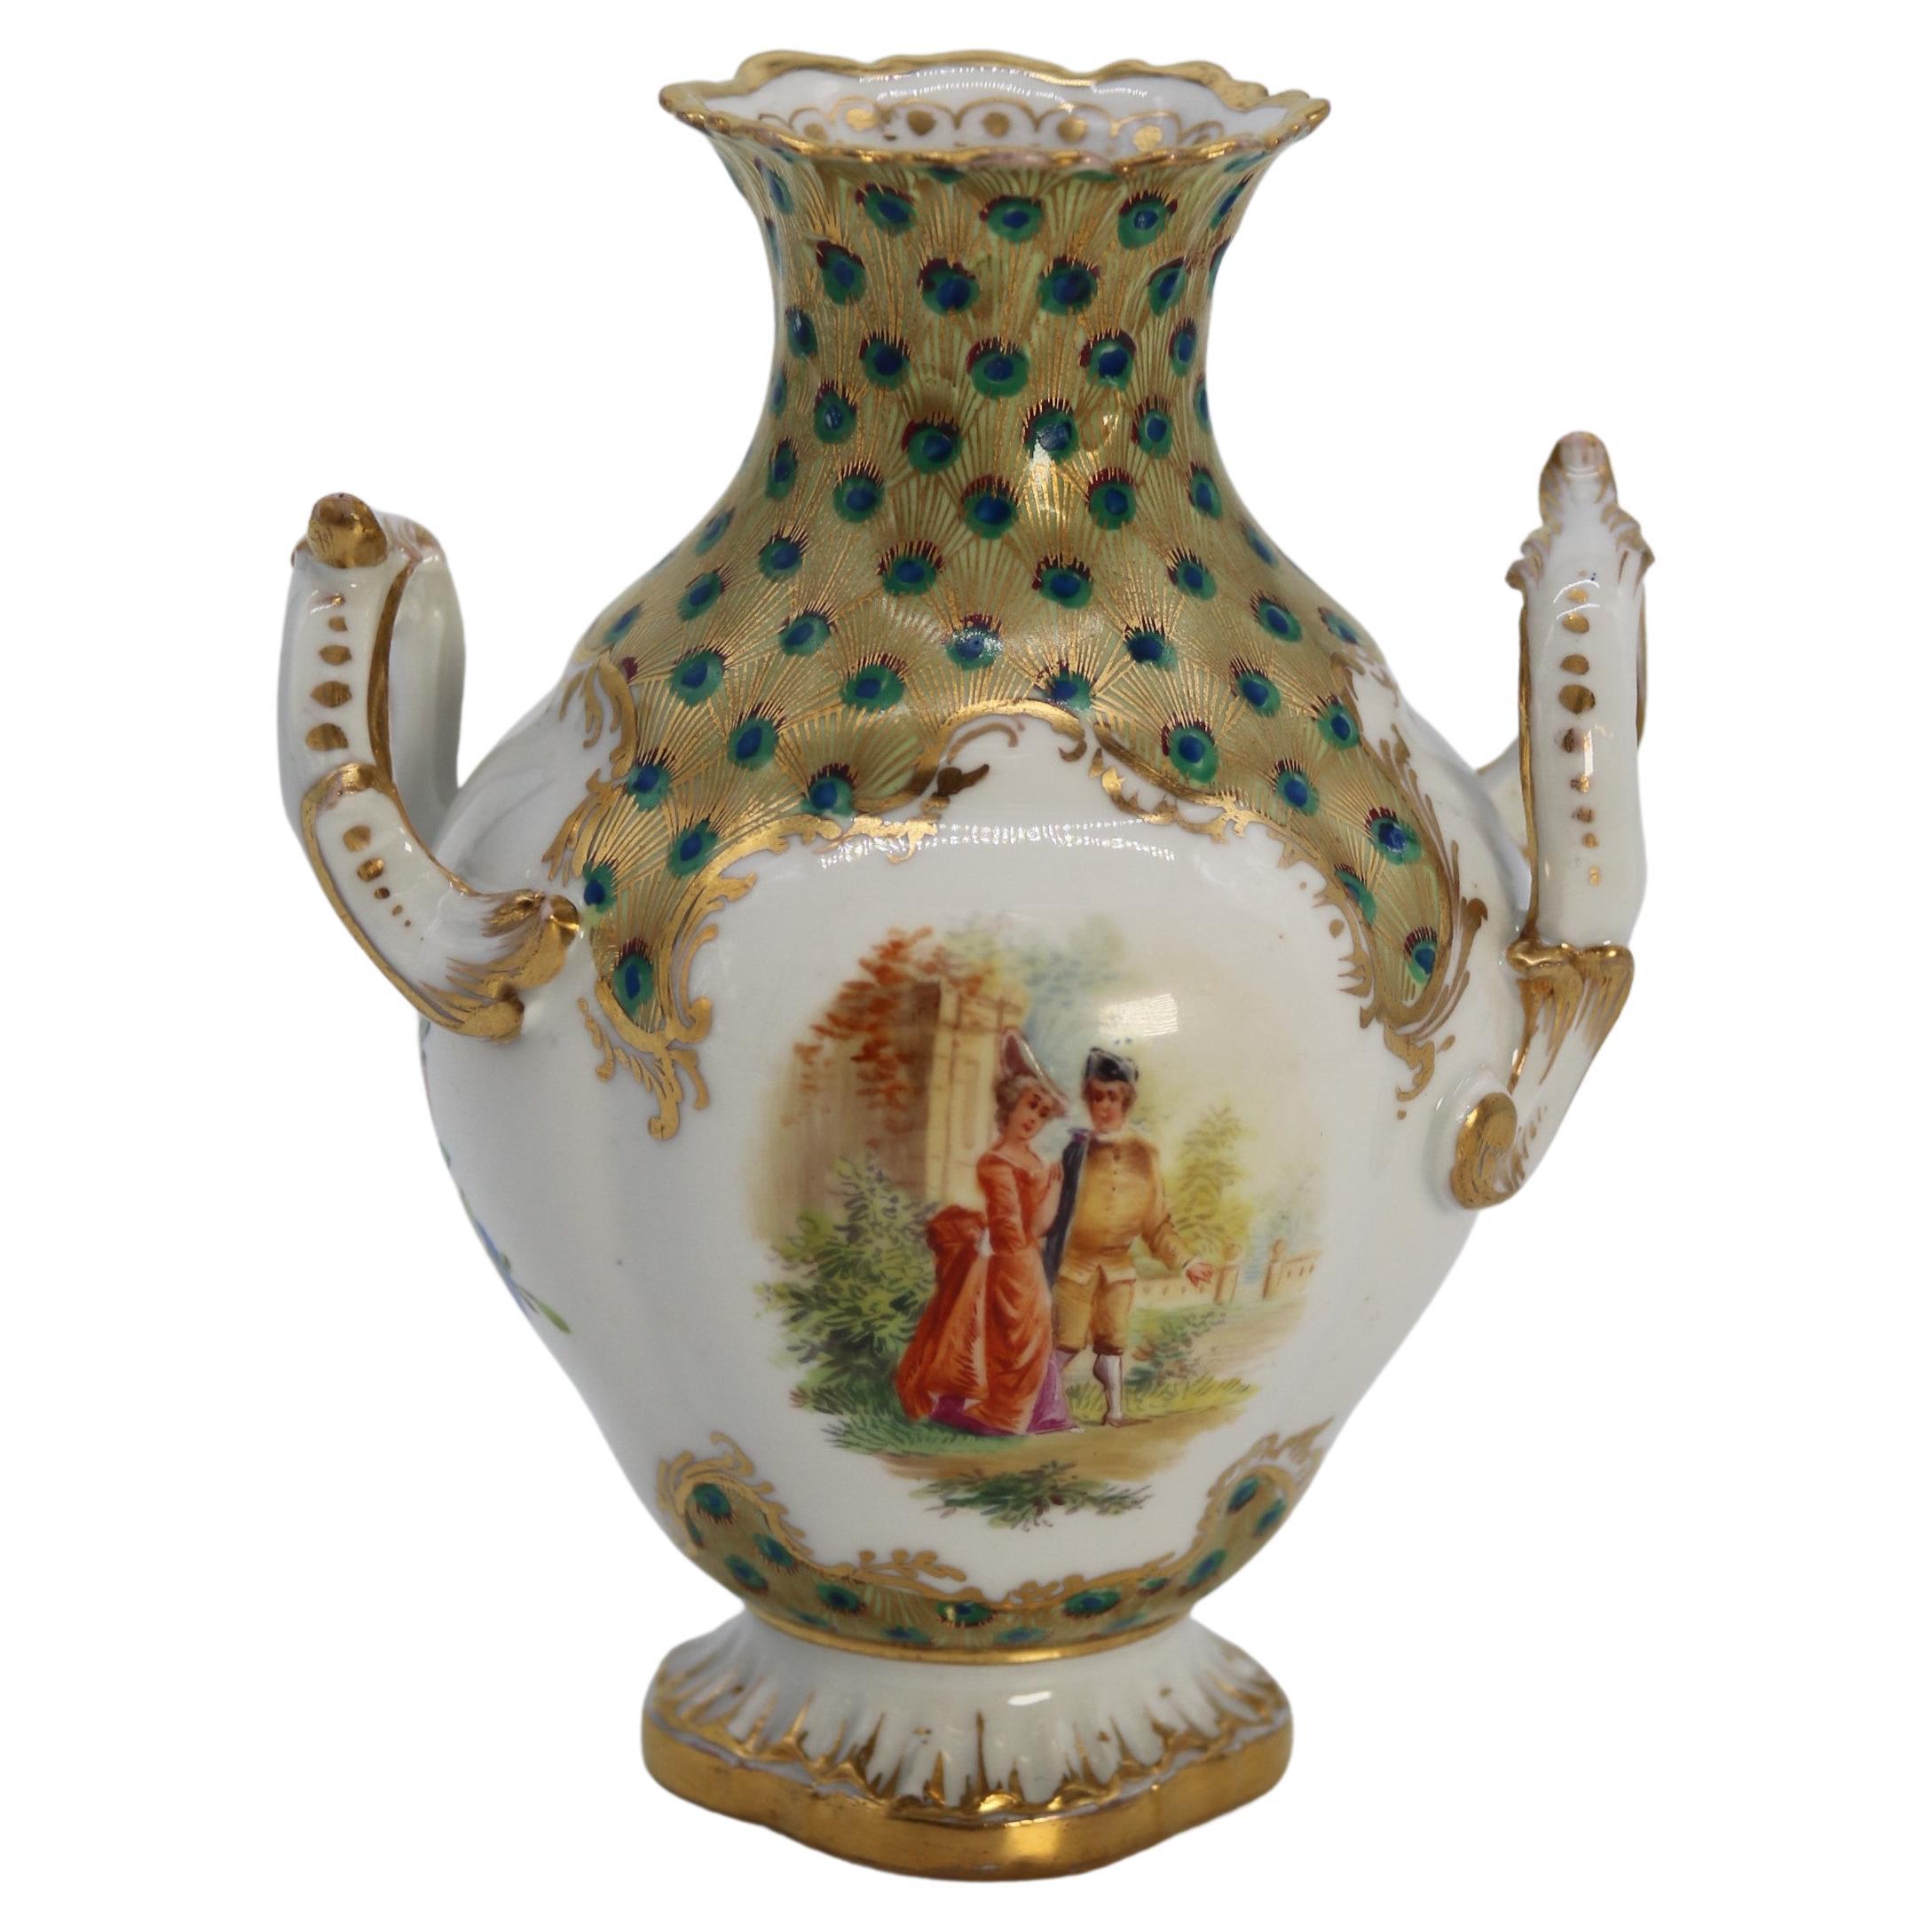 Dresden Porcelain Hand Painted and Gilded Rococo Revival Vase, circa 1900